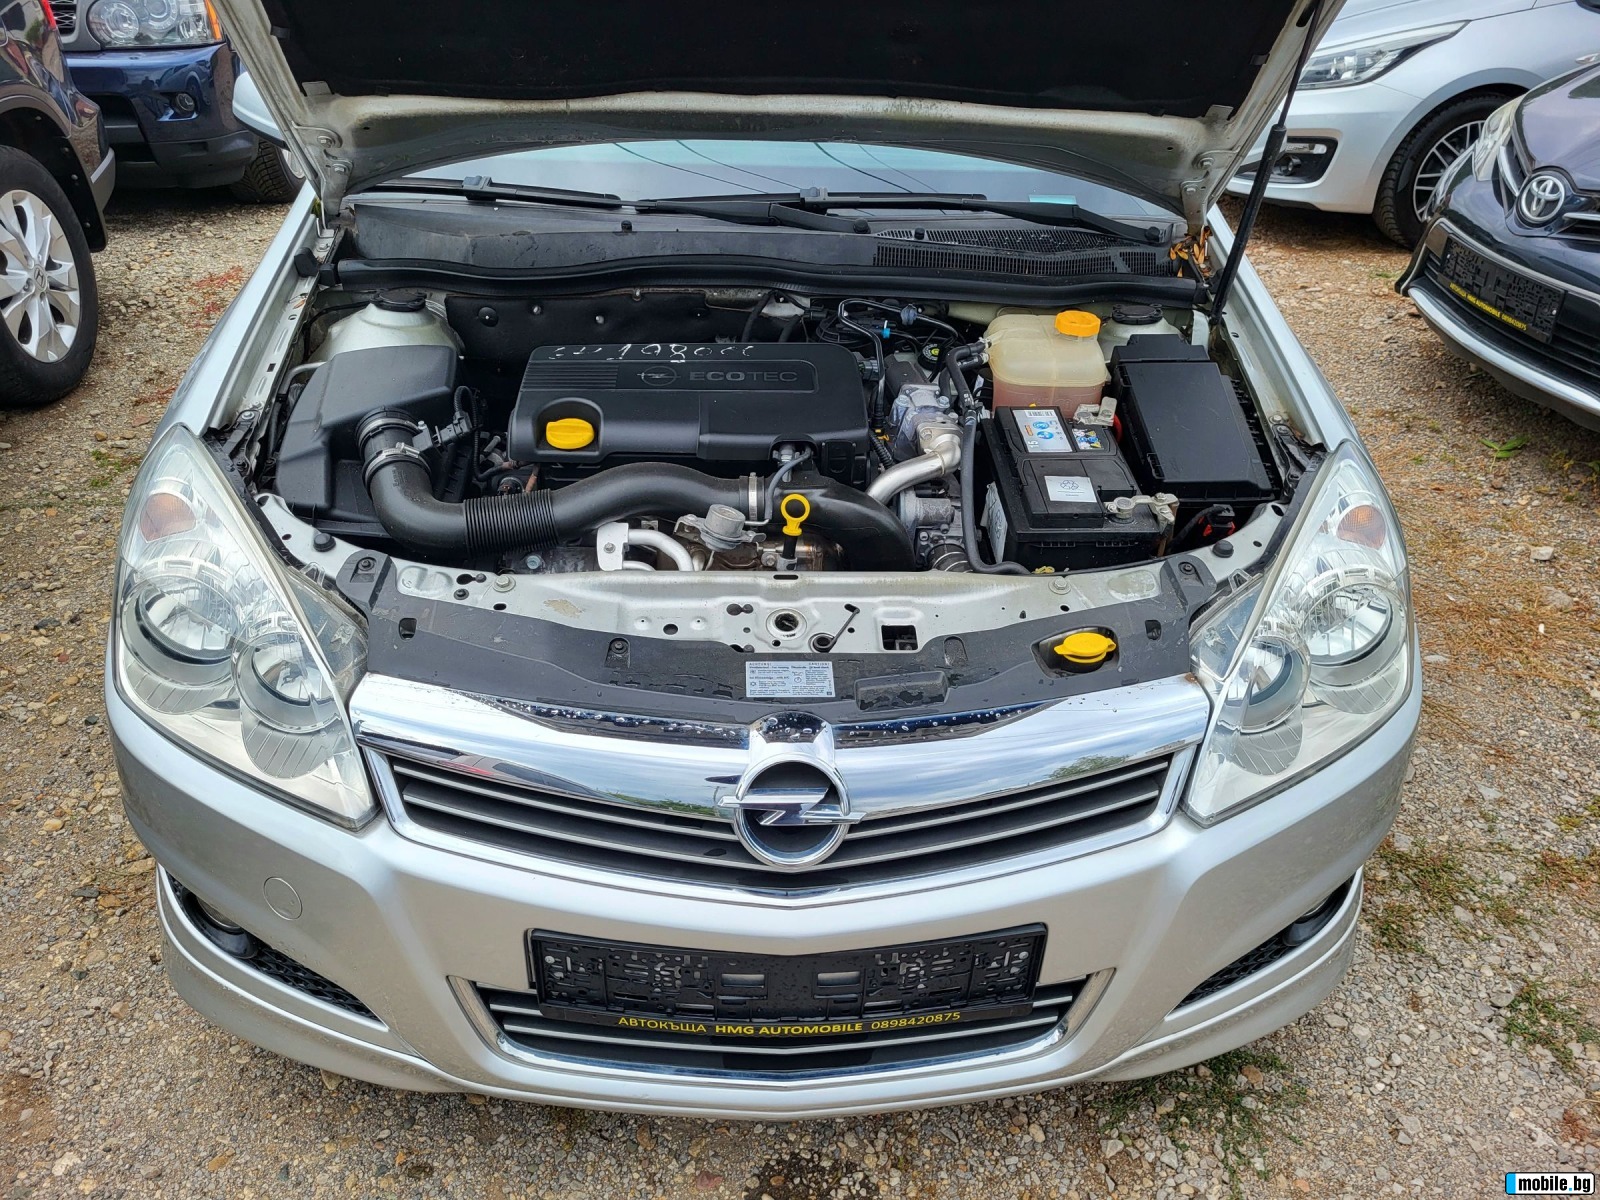 Opel Astra 1.7 CDTI - OPC PACKET  | Mobile.bg   17